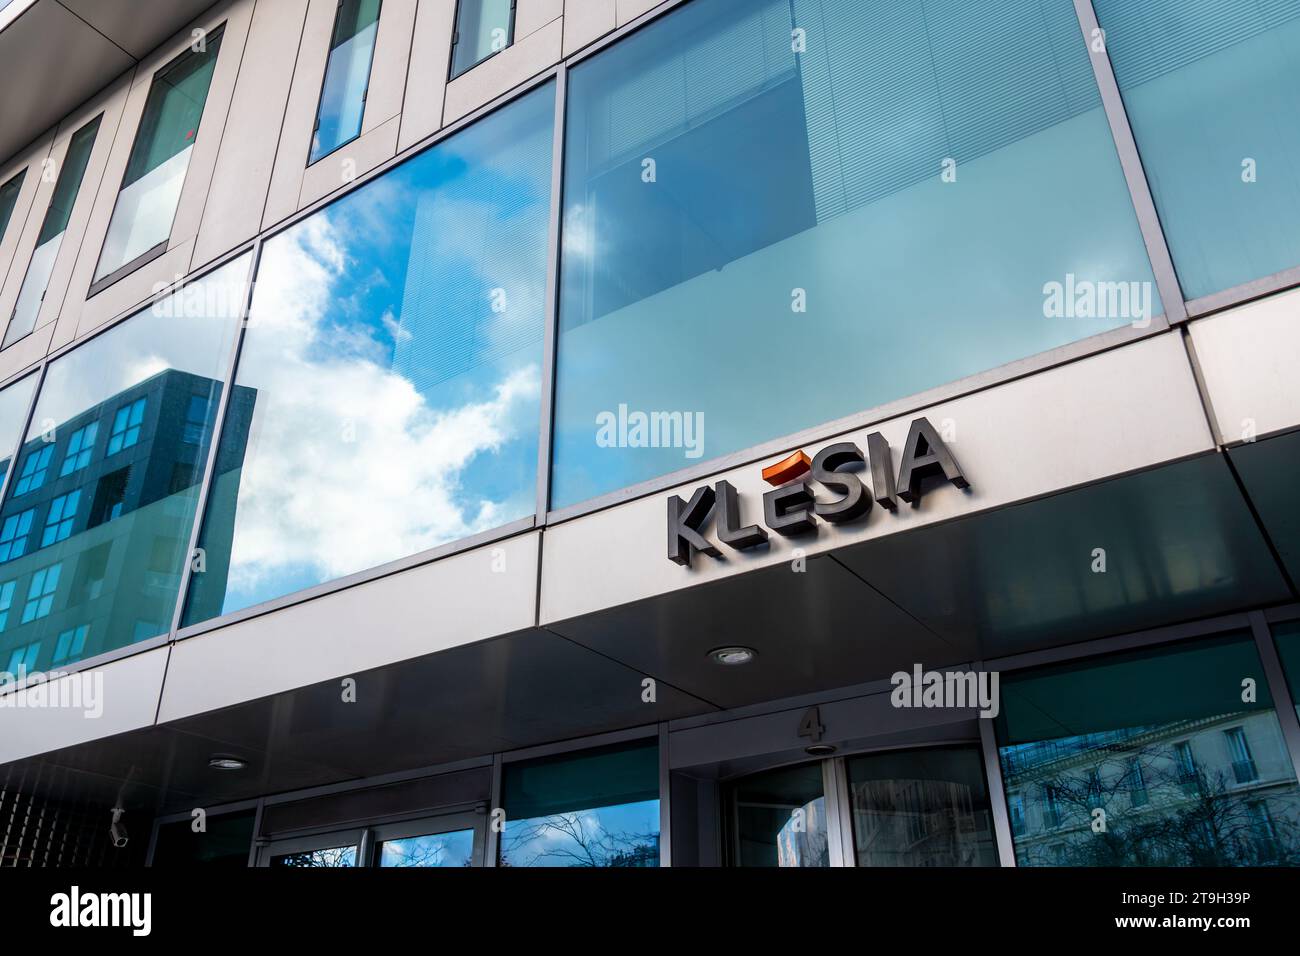 Facade of the Klesia headquarters. Klesia is a French joint social protection group specializing in health insurance, welfare and retirement Stock Photo